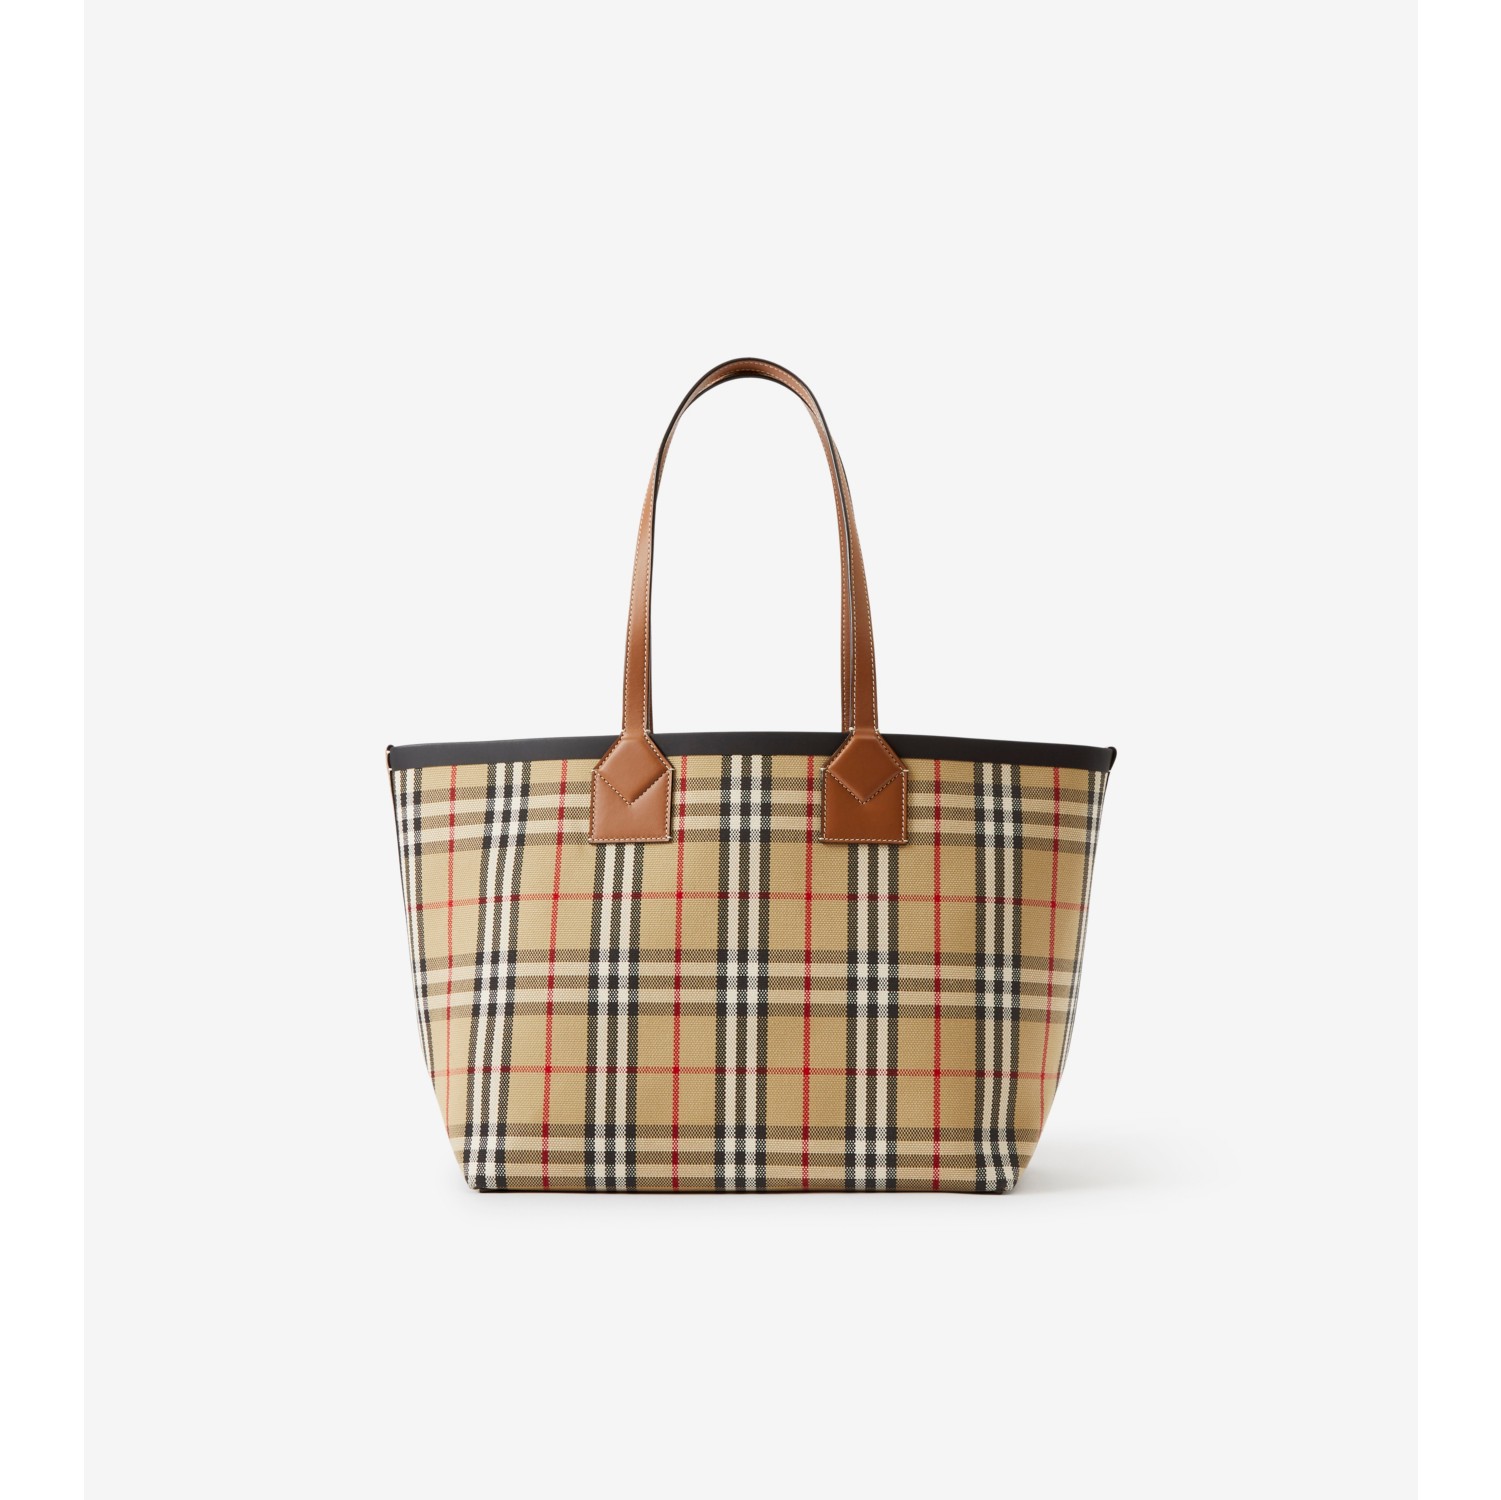 burberry canvas tote bag